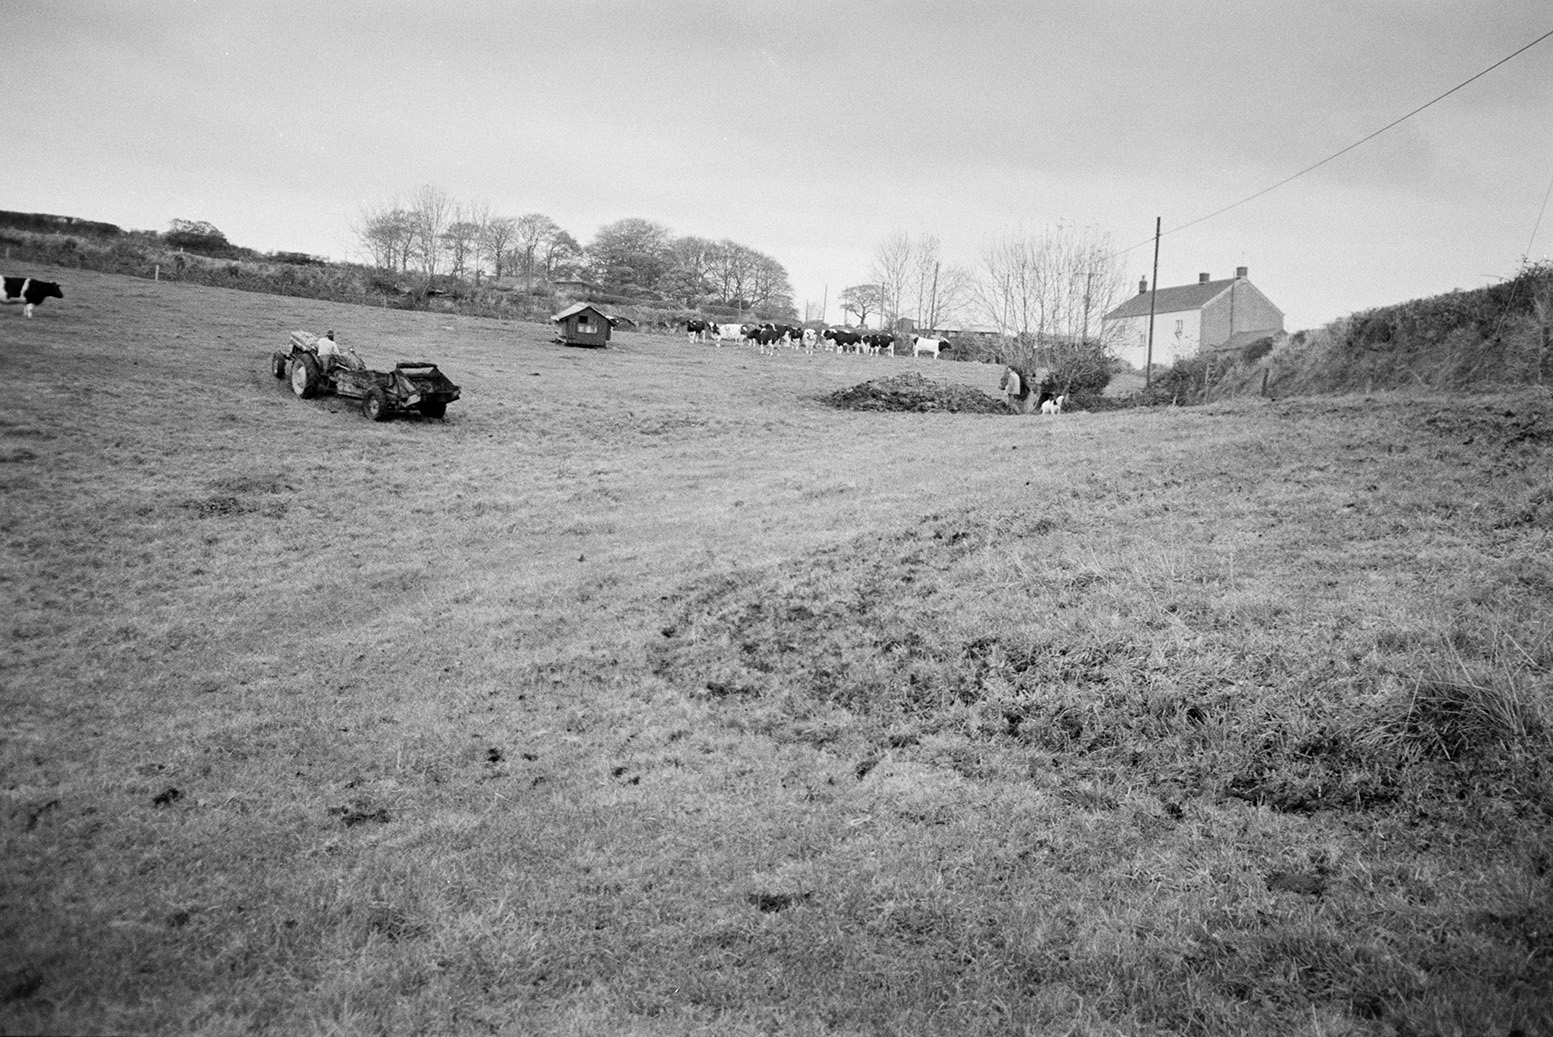 Derek Bright driving a muck spreader through a field with cows and a small wooden shed, possibly a poultry house, at Mill Road Farm, Beaford. A farmhouse can be seen in the background. The farm was also known as Jeffrys.